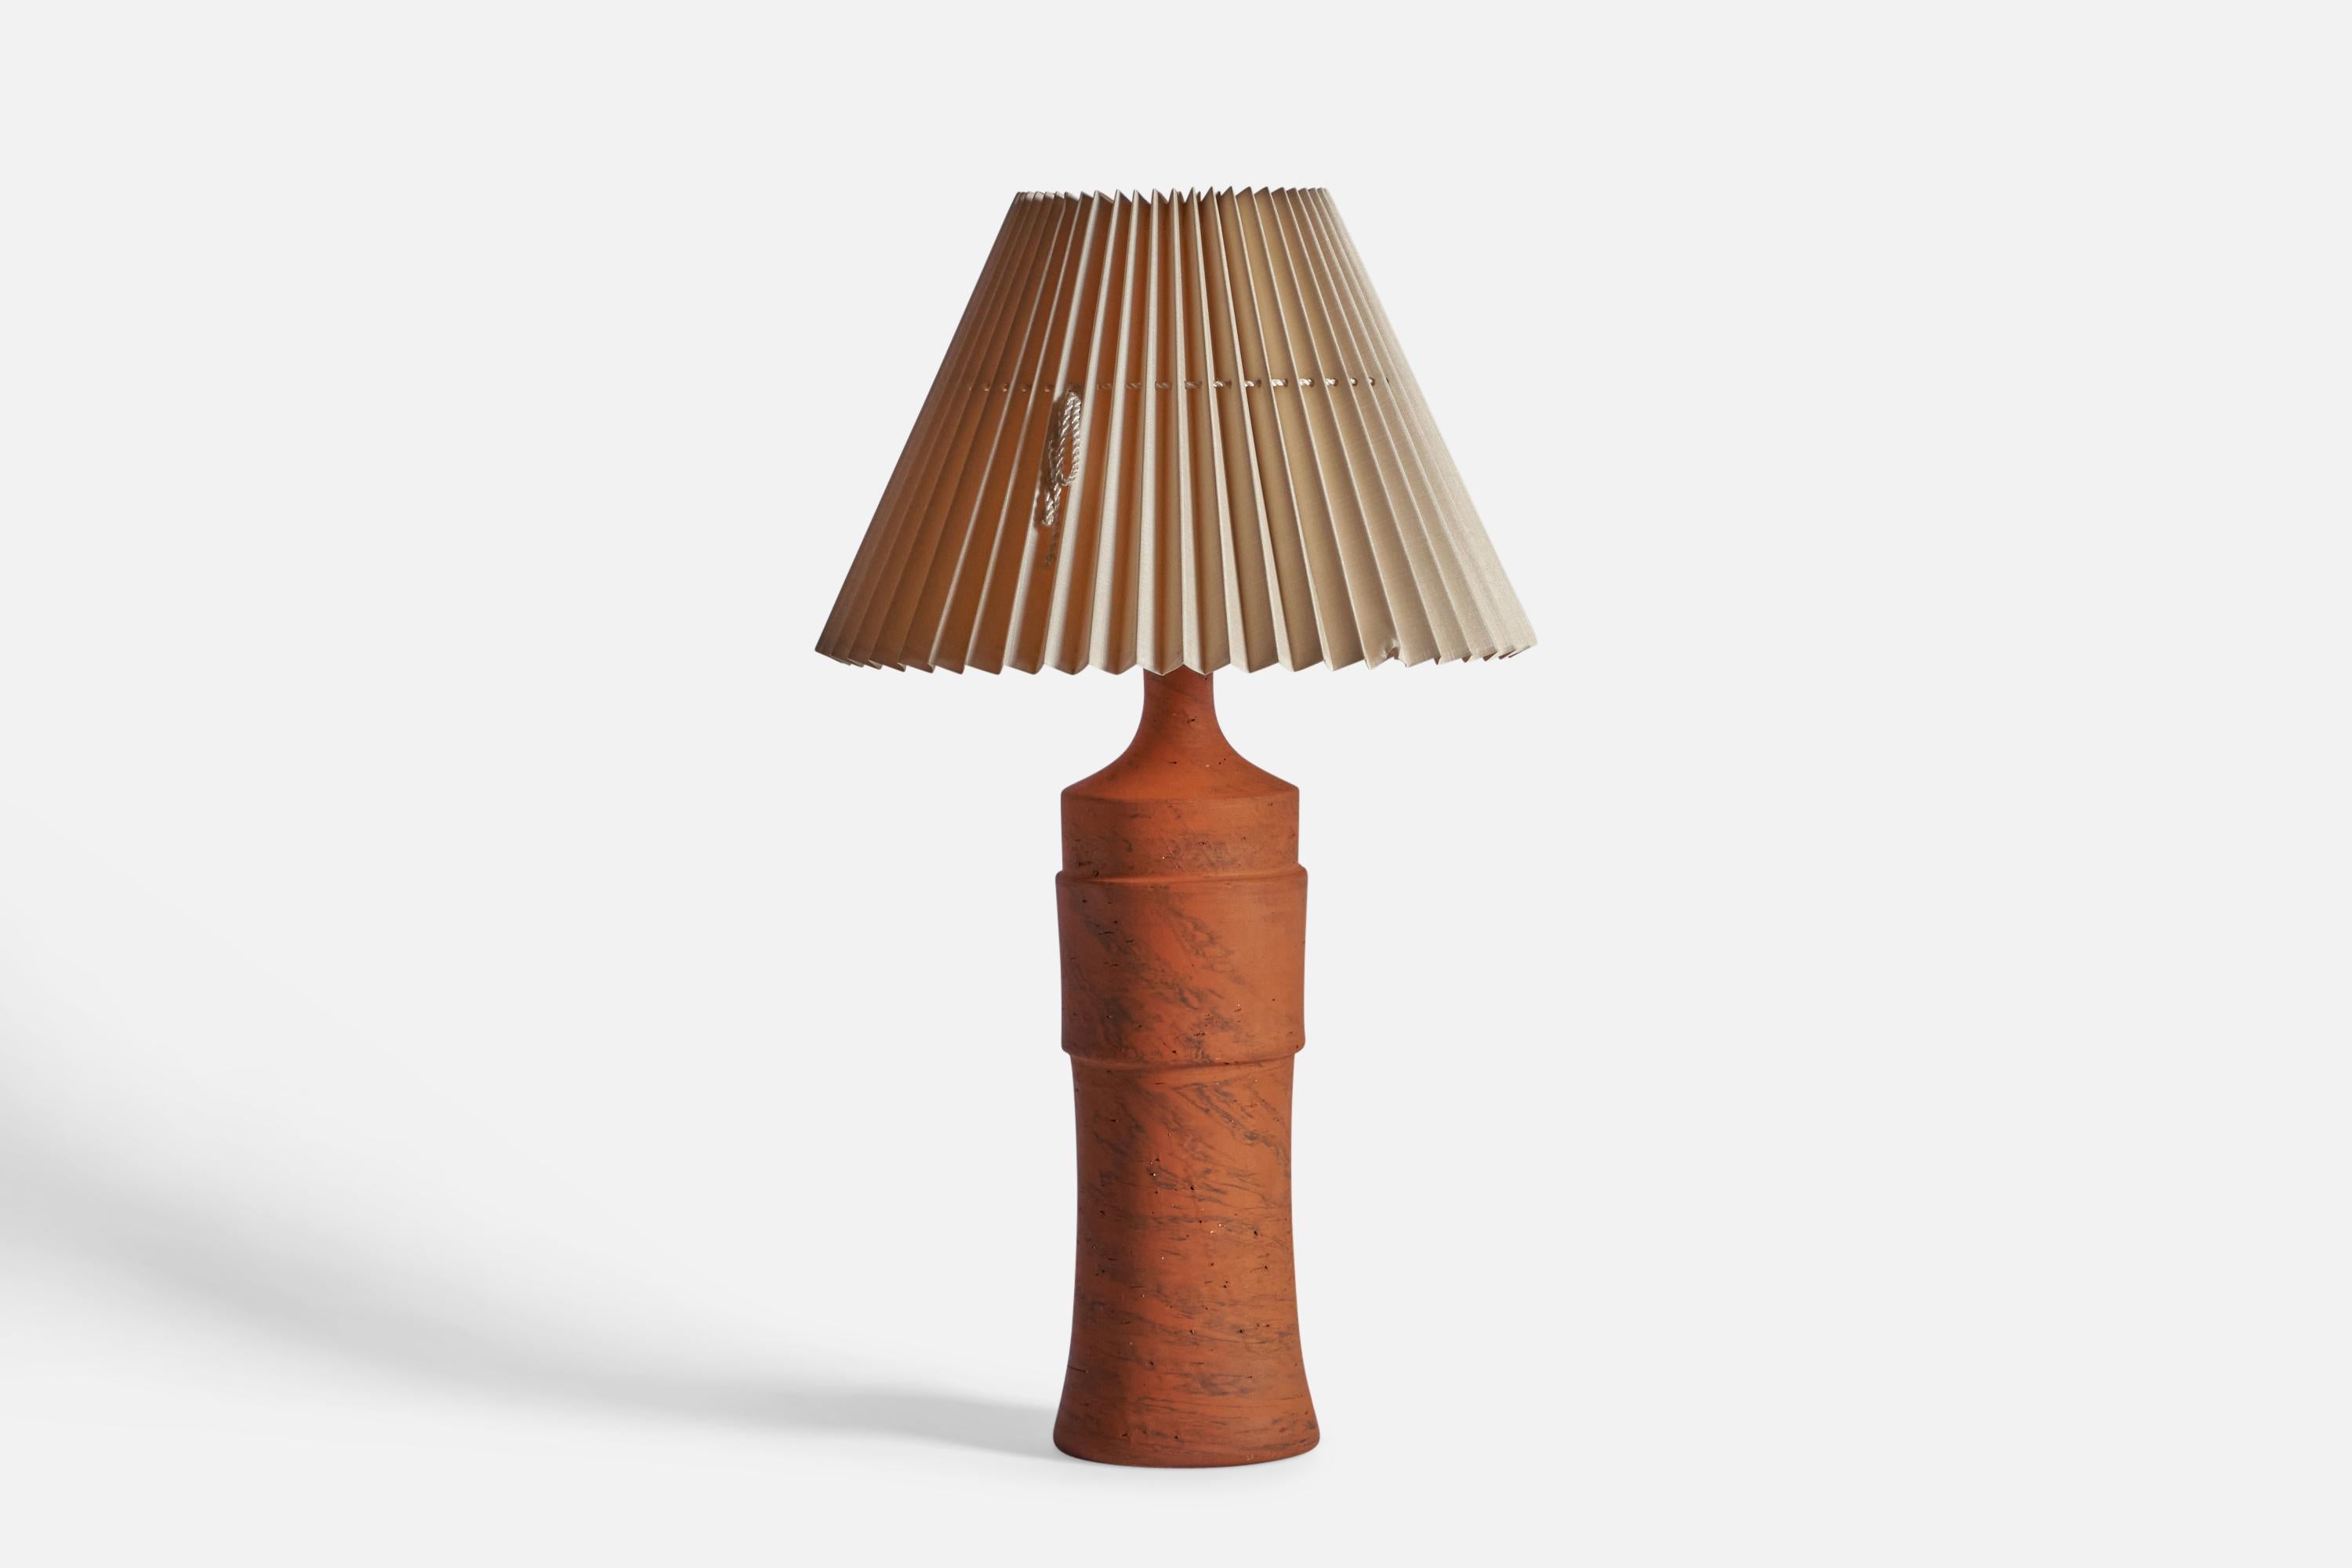 A sizeable unglazed terracotta and paper table lamp, designed by architect Børge Wernonch and produced by Afta, Denmark, c. 1940s

Sold with Lampshade.

Dimensions stated are of table lamp with lampshade attached.